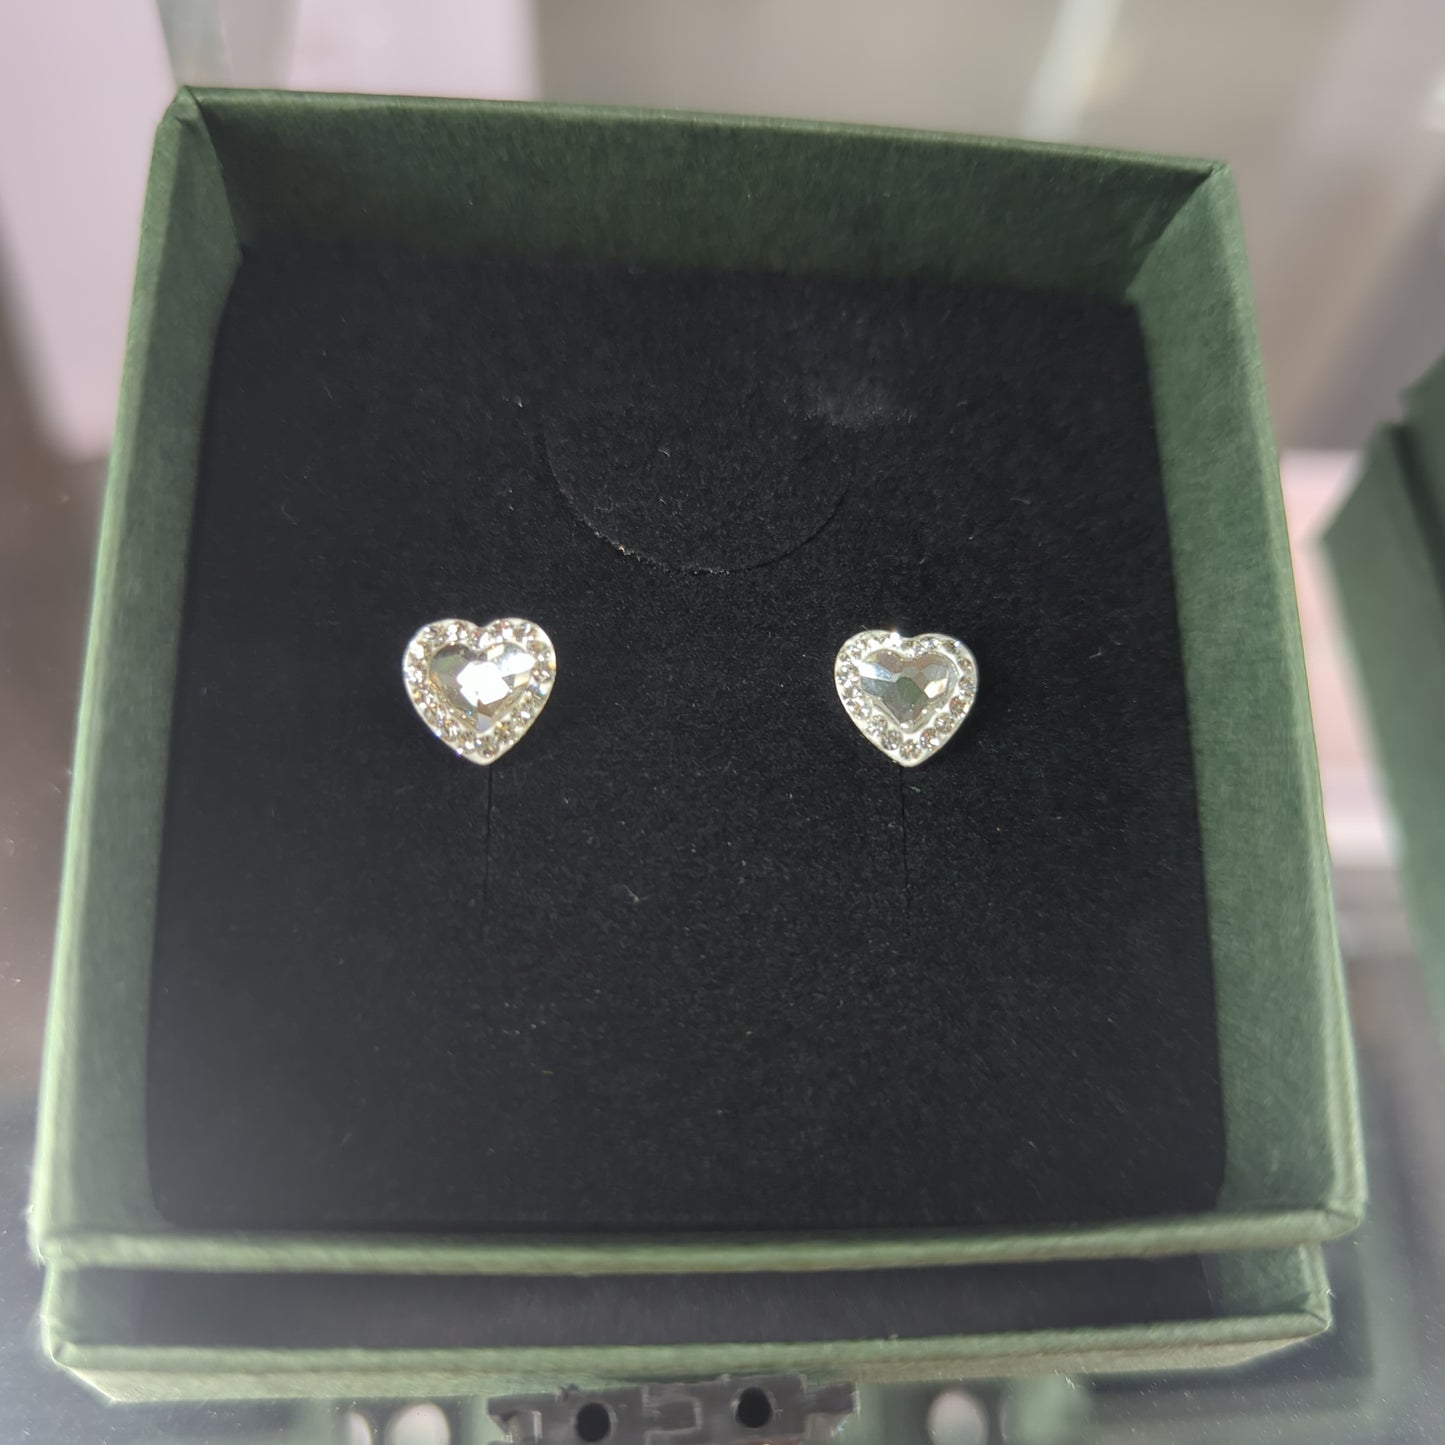 Northern Angels Sterling Silver Heart Ear Studs-Crystal